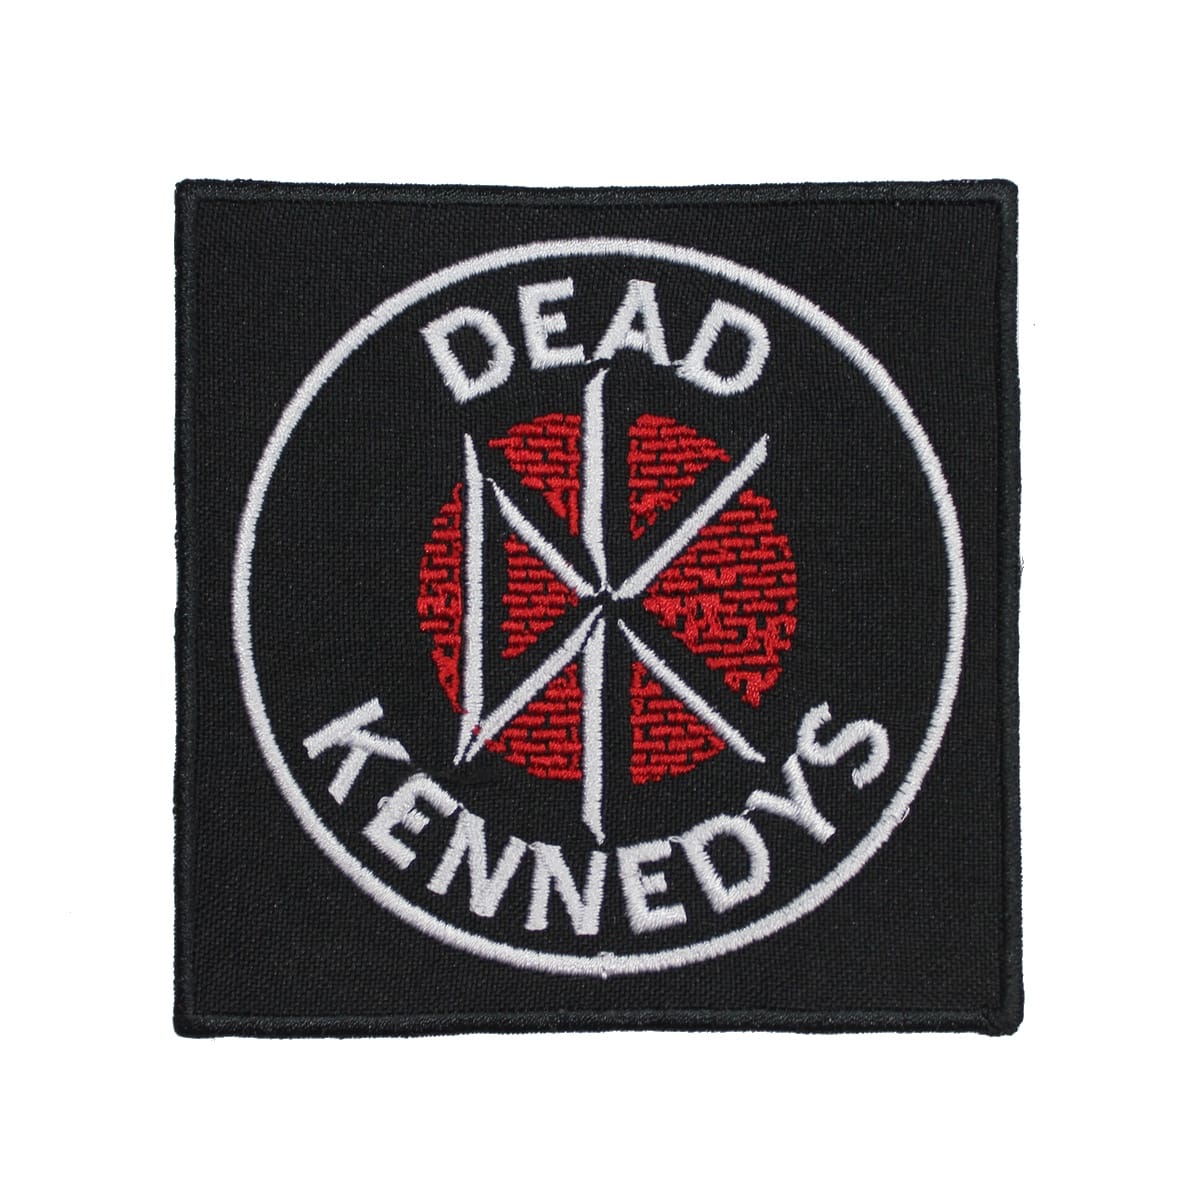 Dead Kennedys Embroidered Patch